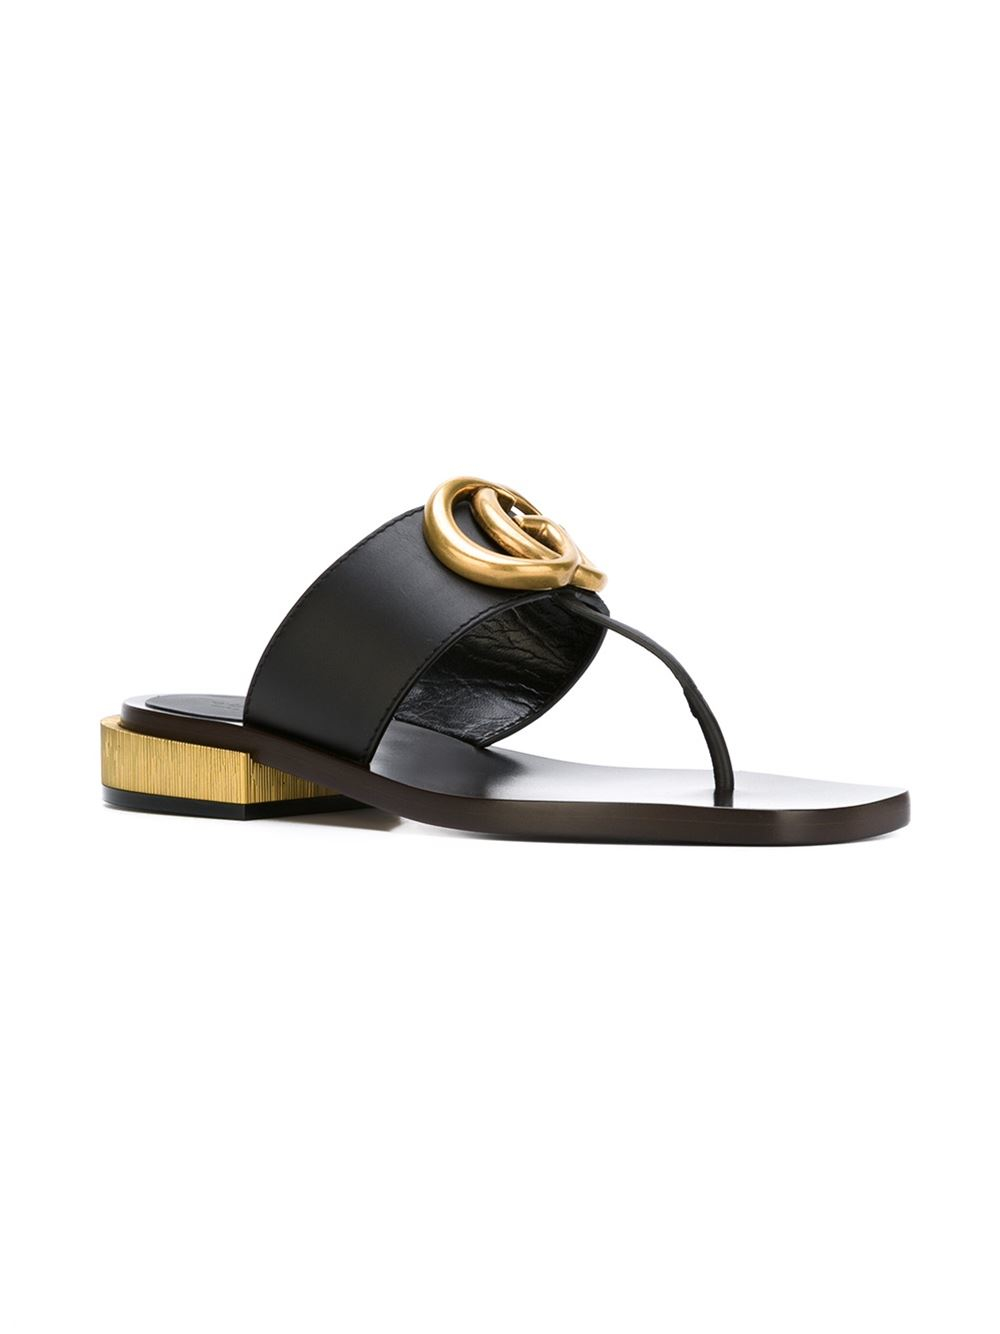 Lyst - Gucci Double-G Leather Sandals in Black